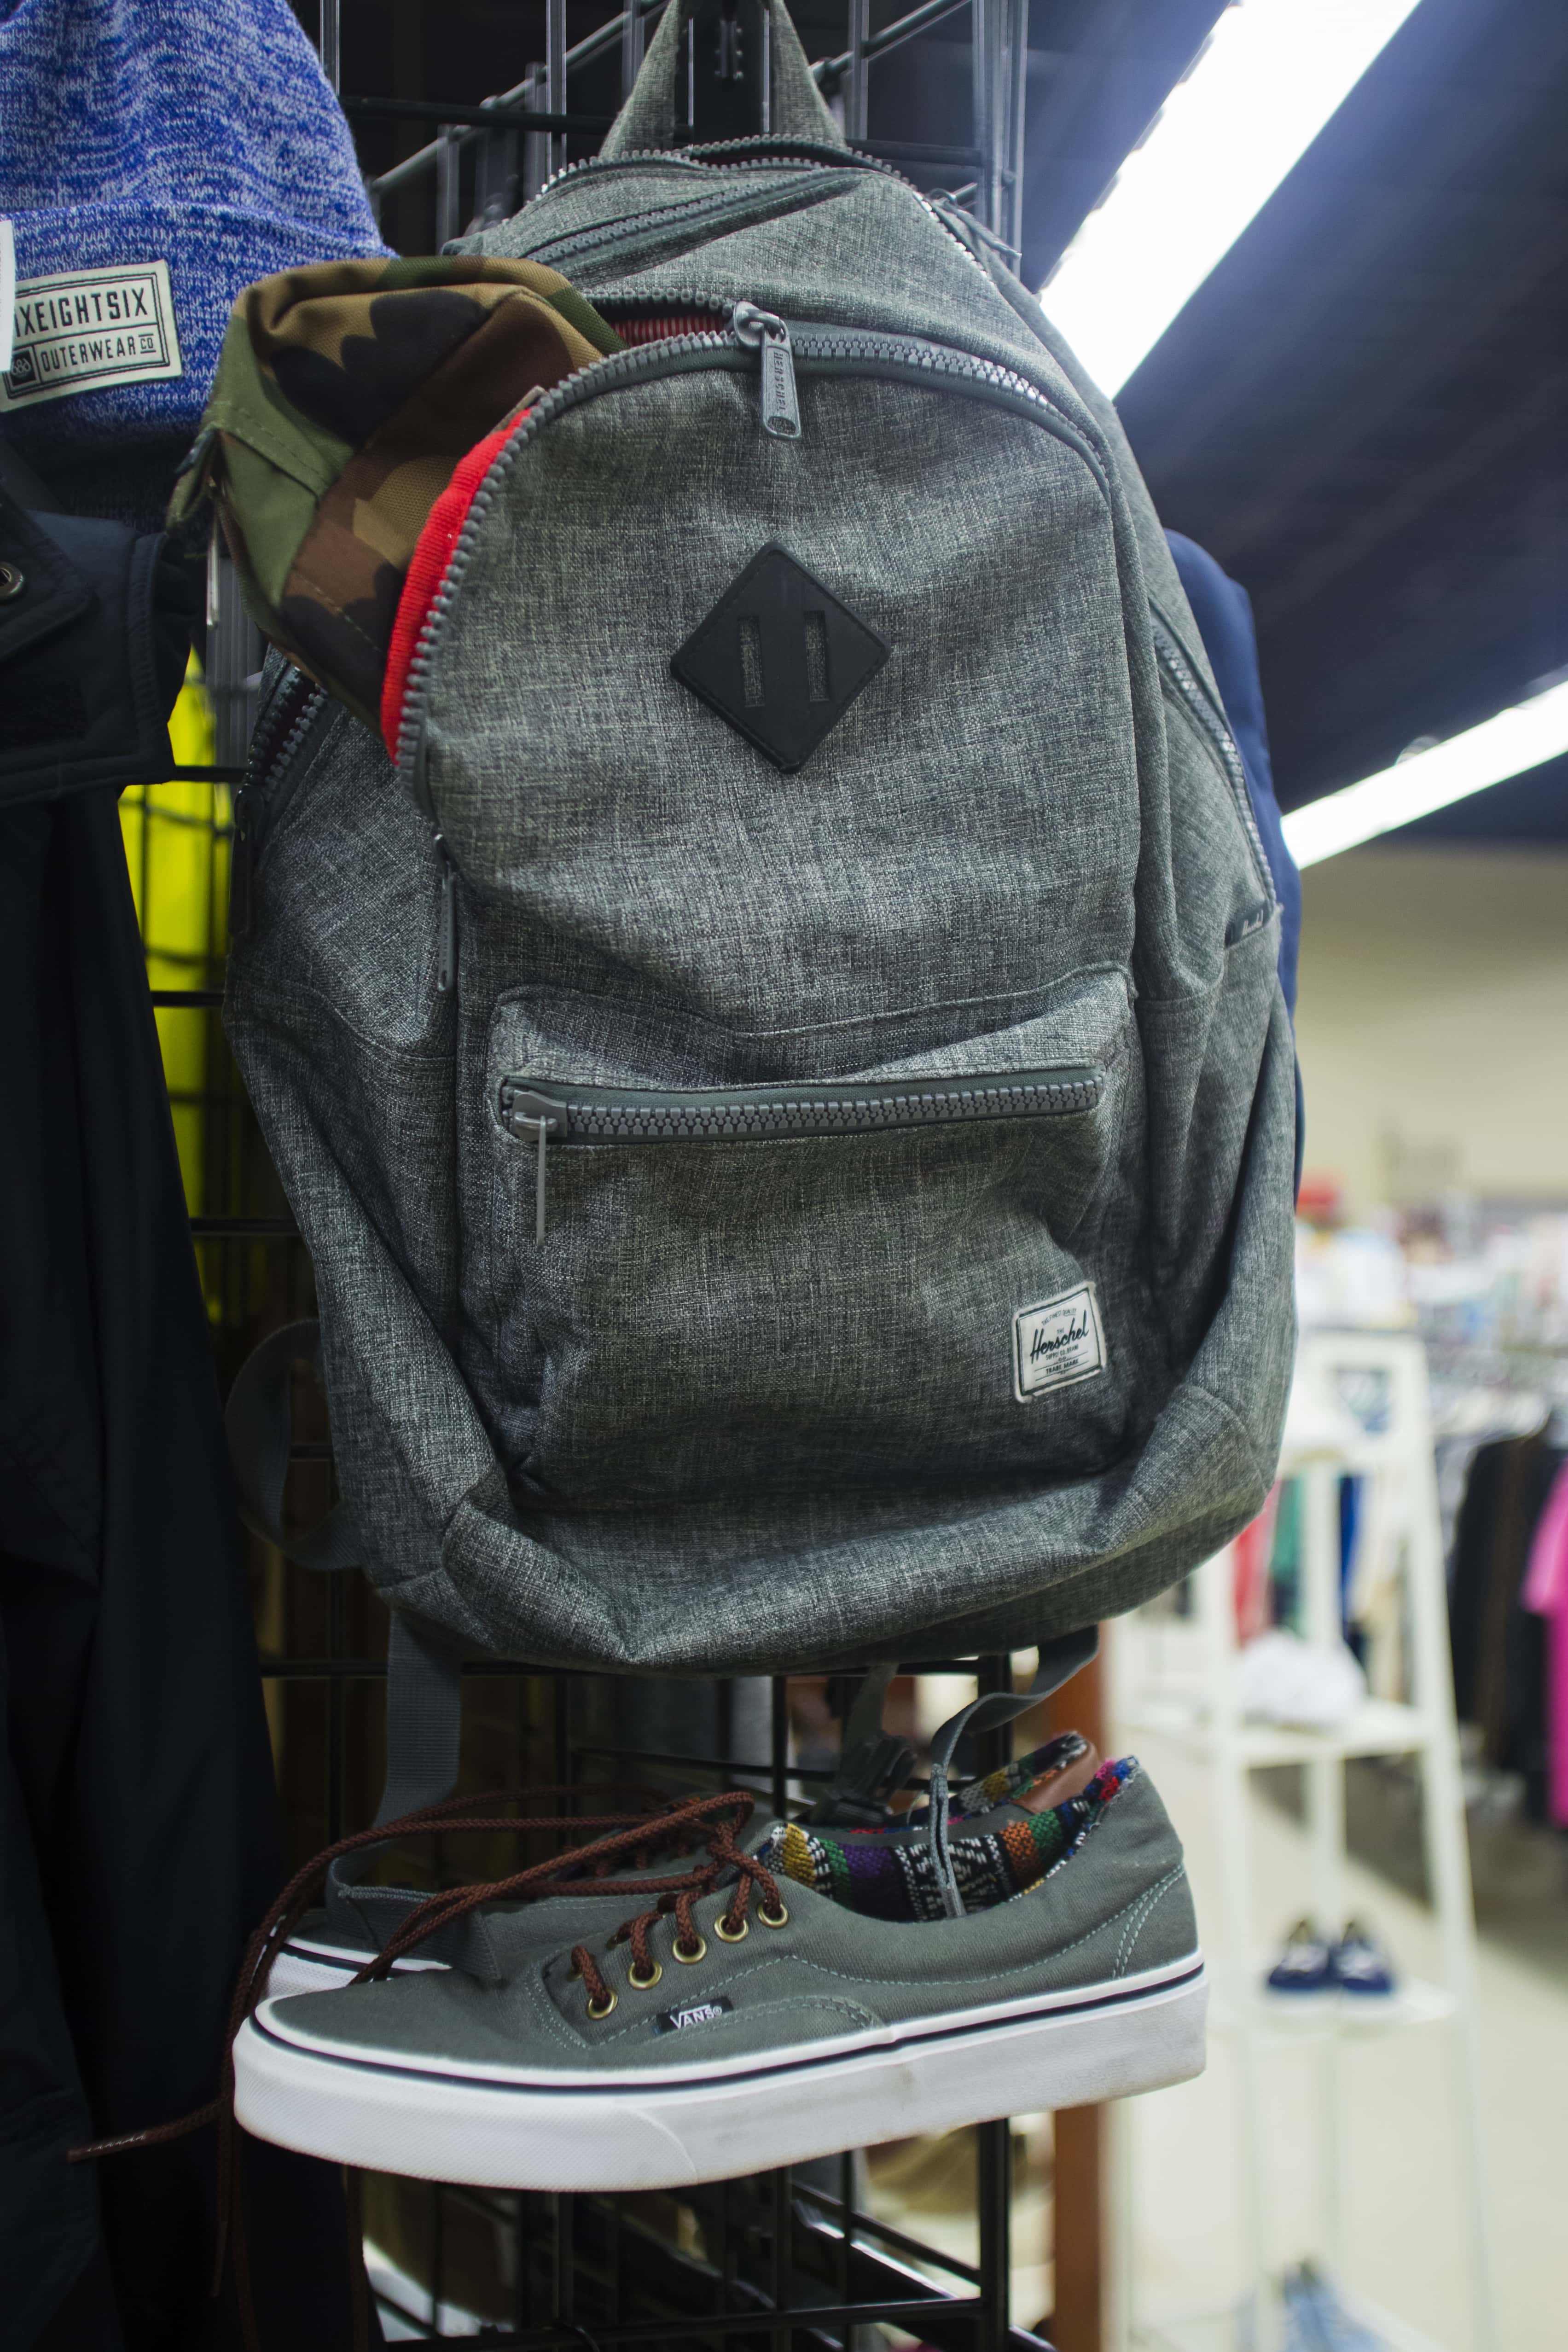 Shop These Back To School Trends At Goodwill To Save Big This Year ...